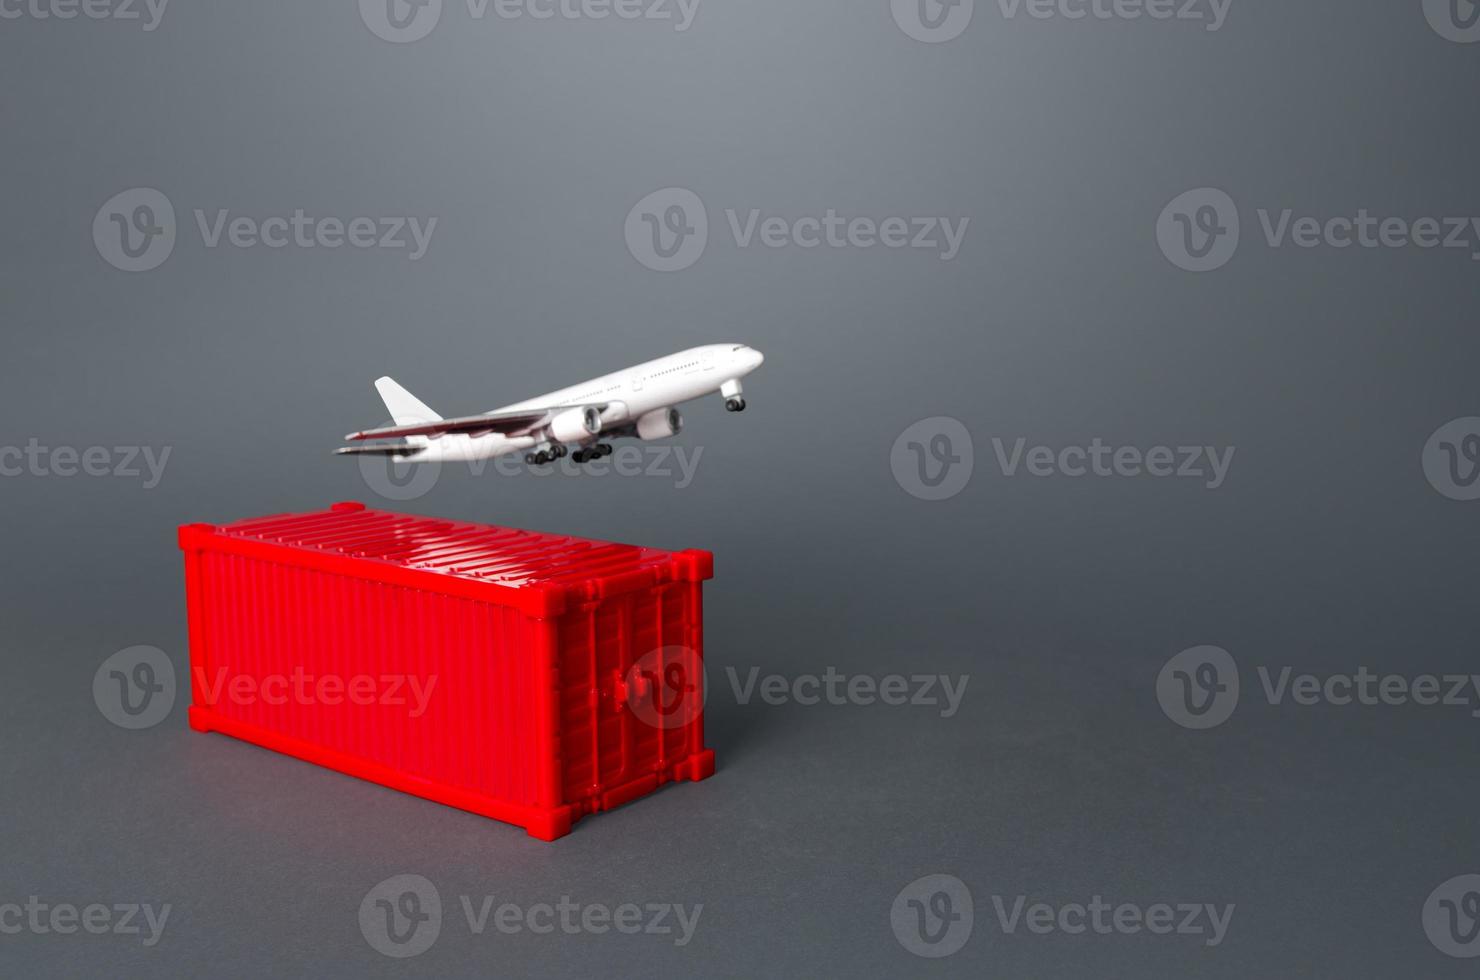 Cargo plane over red ship container. Services of express delivery and transportation of goods by plane. World trade and logistics. Business and commerce, import and export of products. Air freight photo